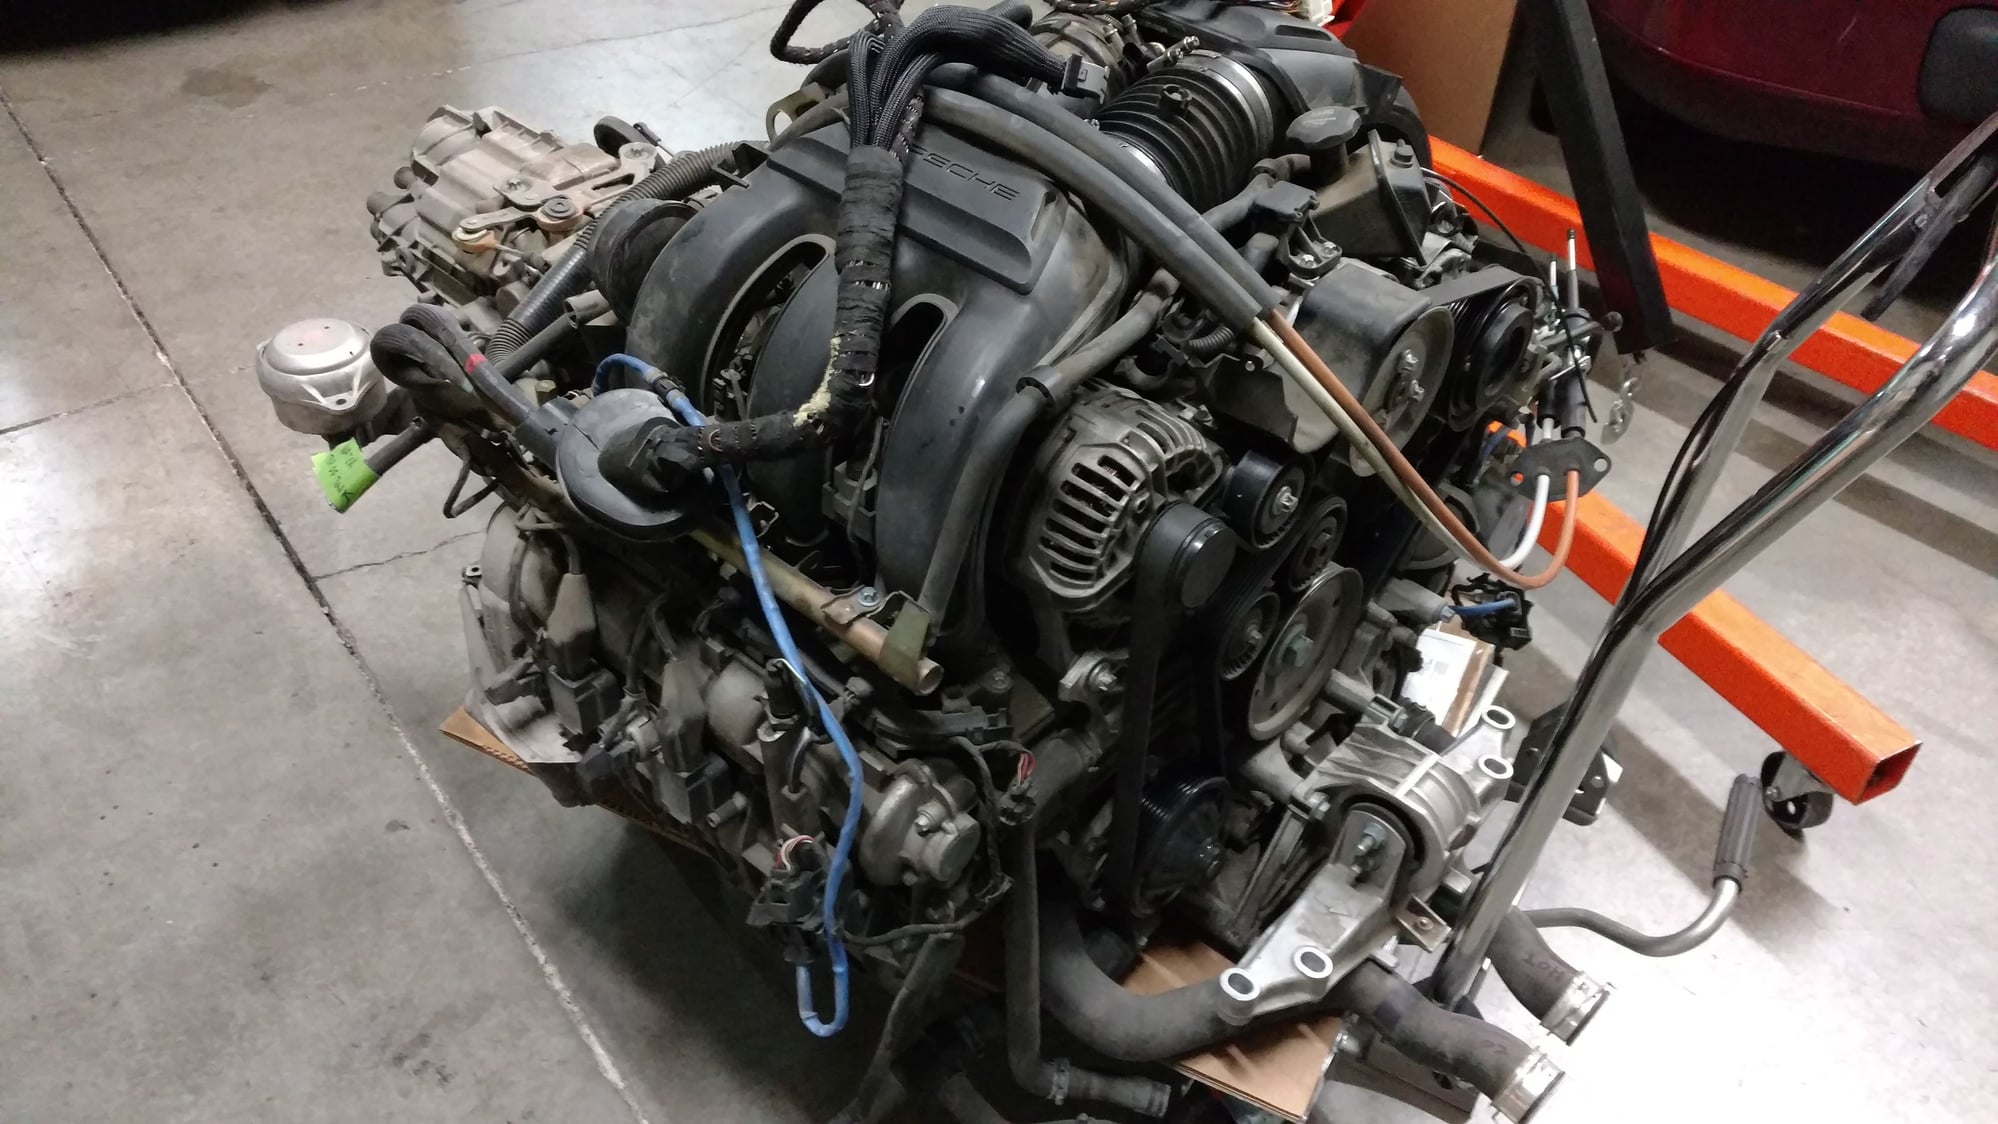 Engine - Complete - 2006 Cayman S engine and transmission - Used - 2007 to 2008 Porsche Boxster - 2006 to 2008 Porsche Cayman - Reno, NV 89502, United States